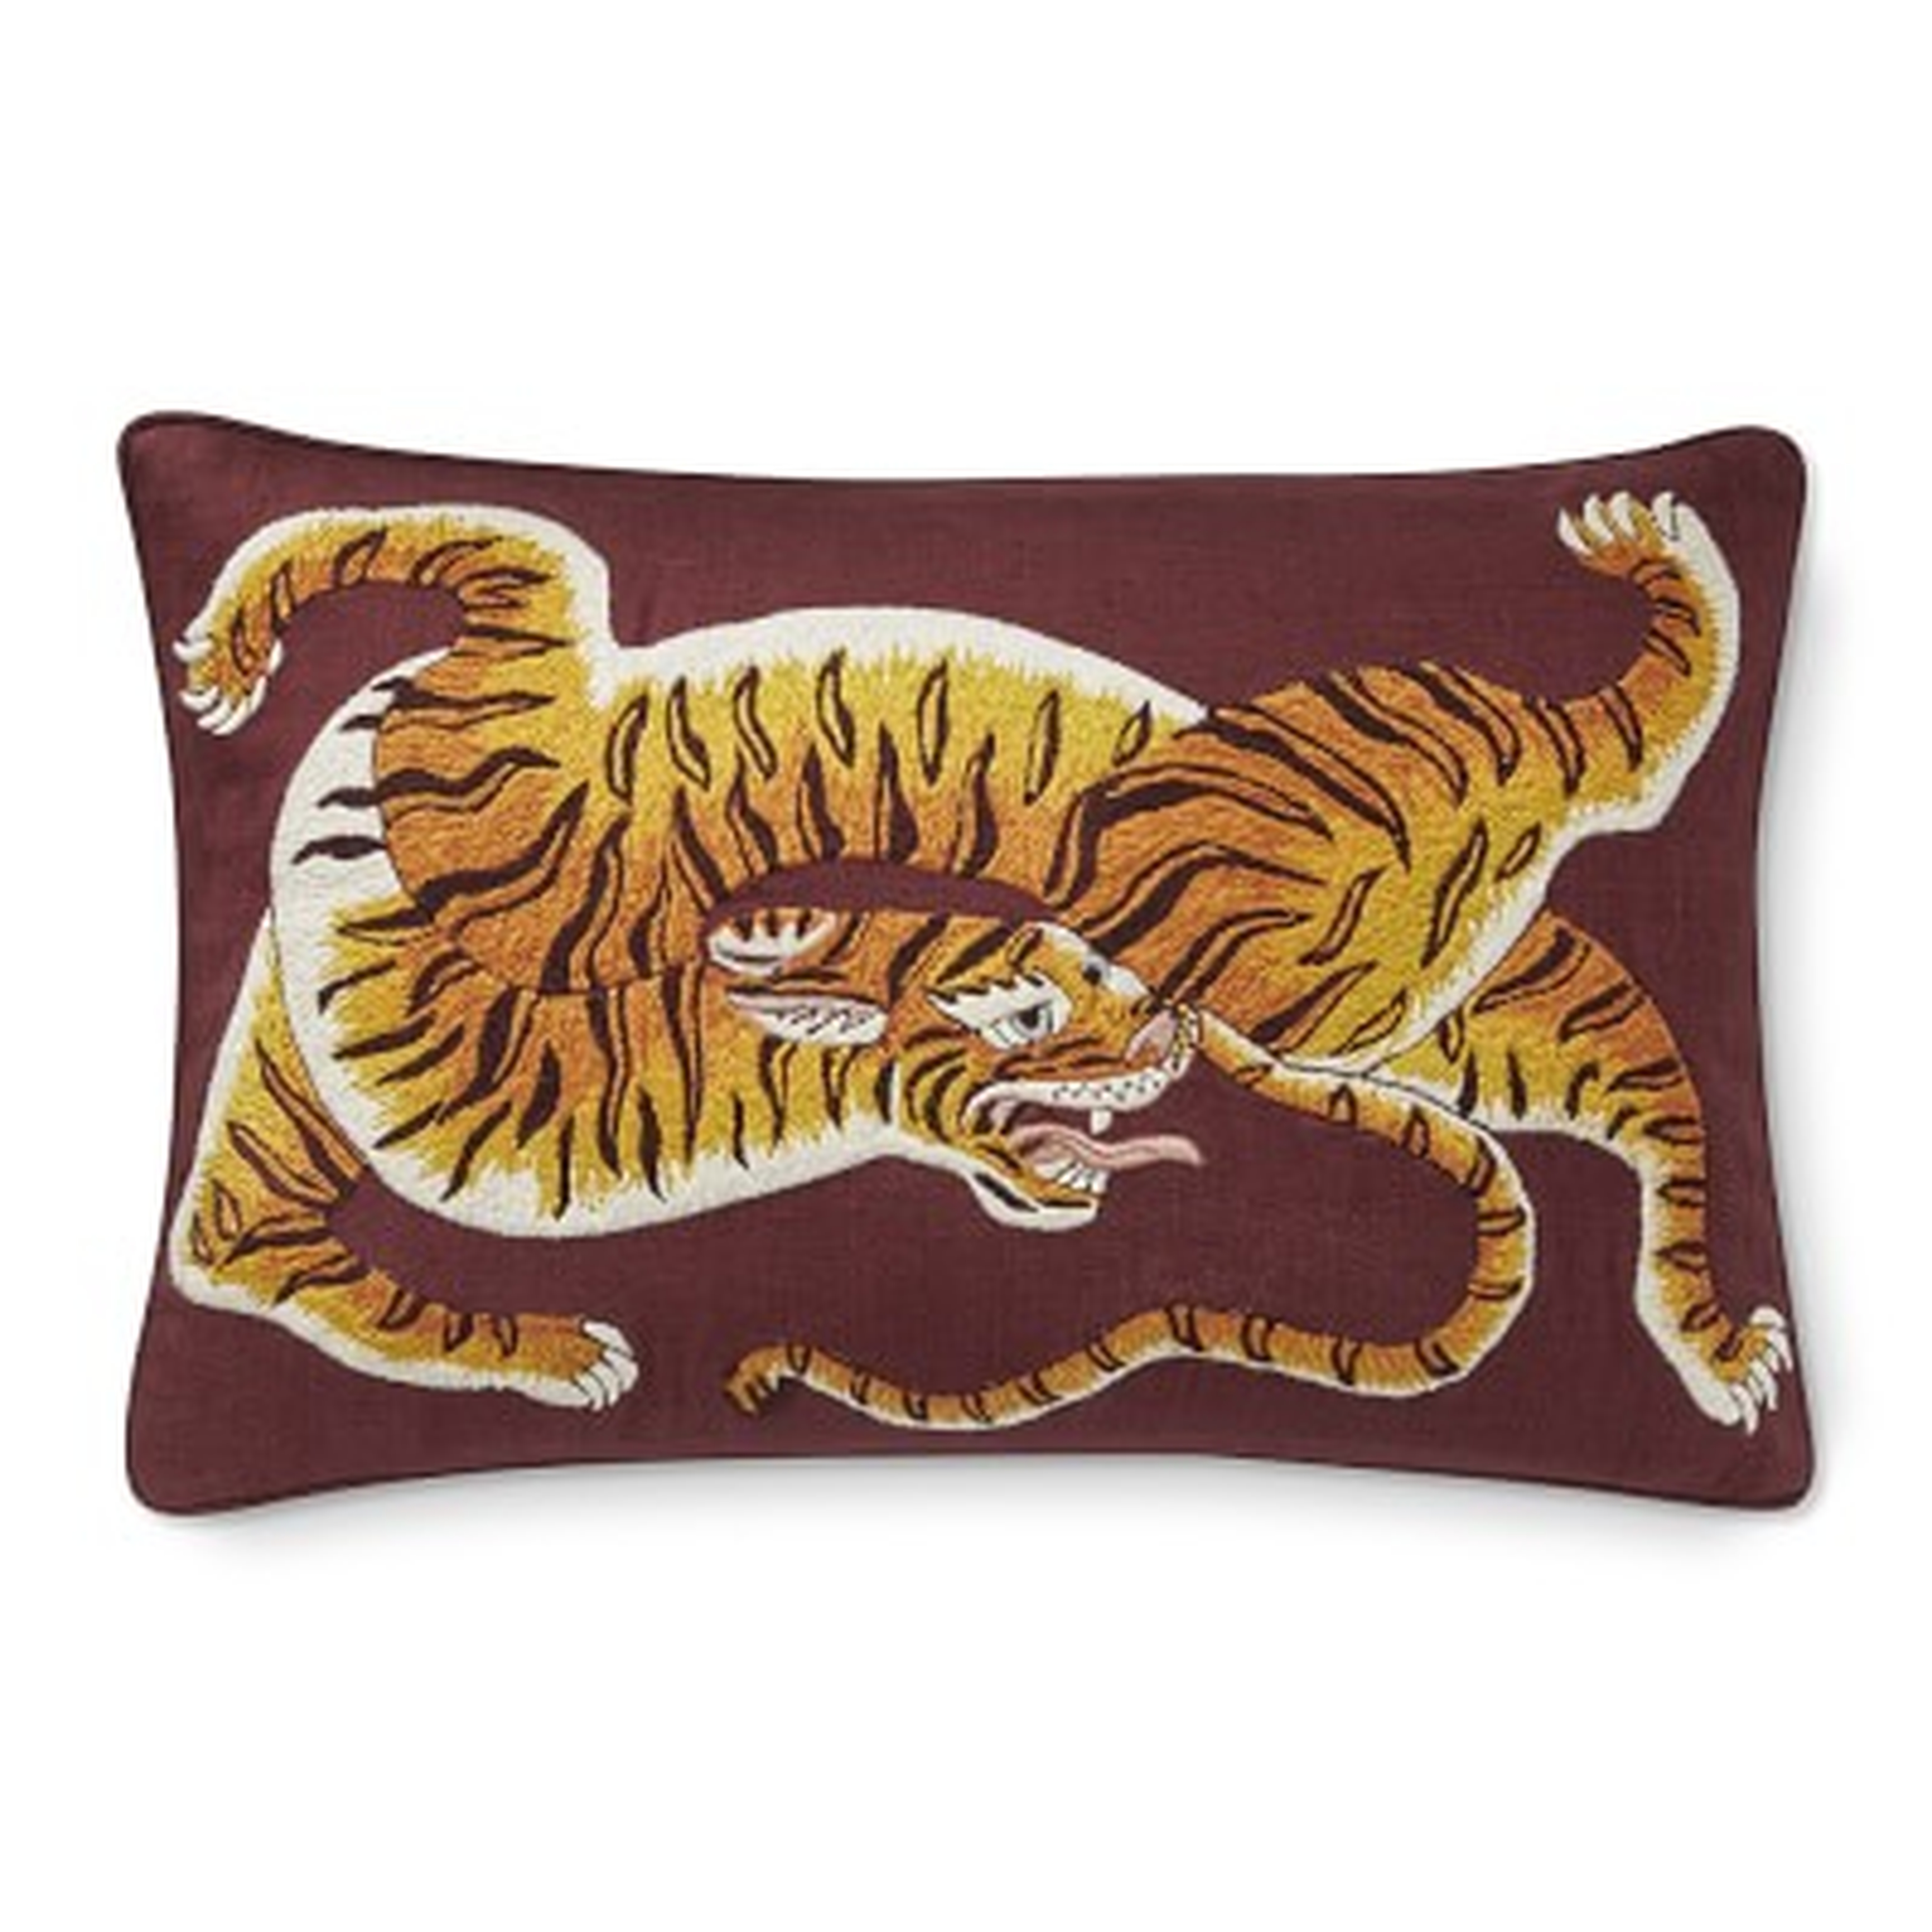 Dharma Tiger Embroidered Lumbar Pillow Cover, 14" X 22", Maroon Red - Williams Sonoma